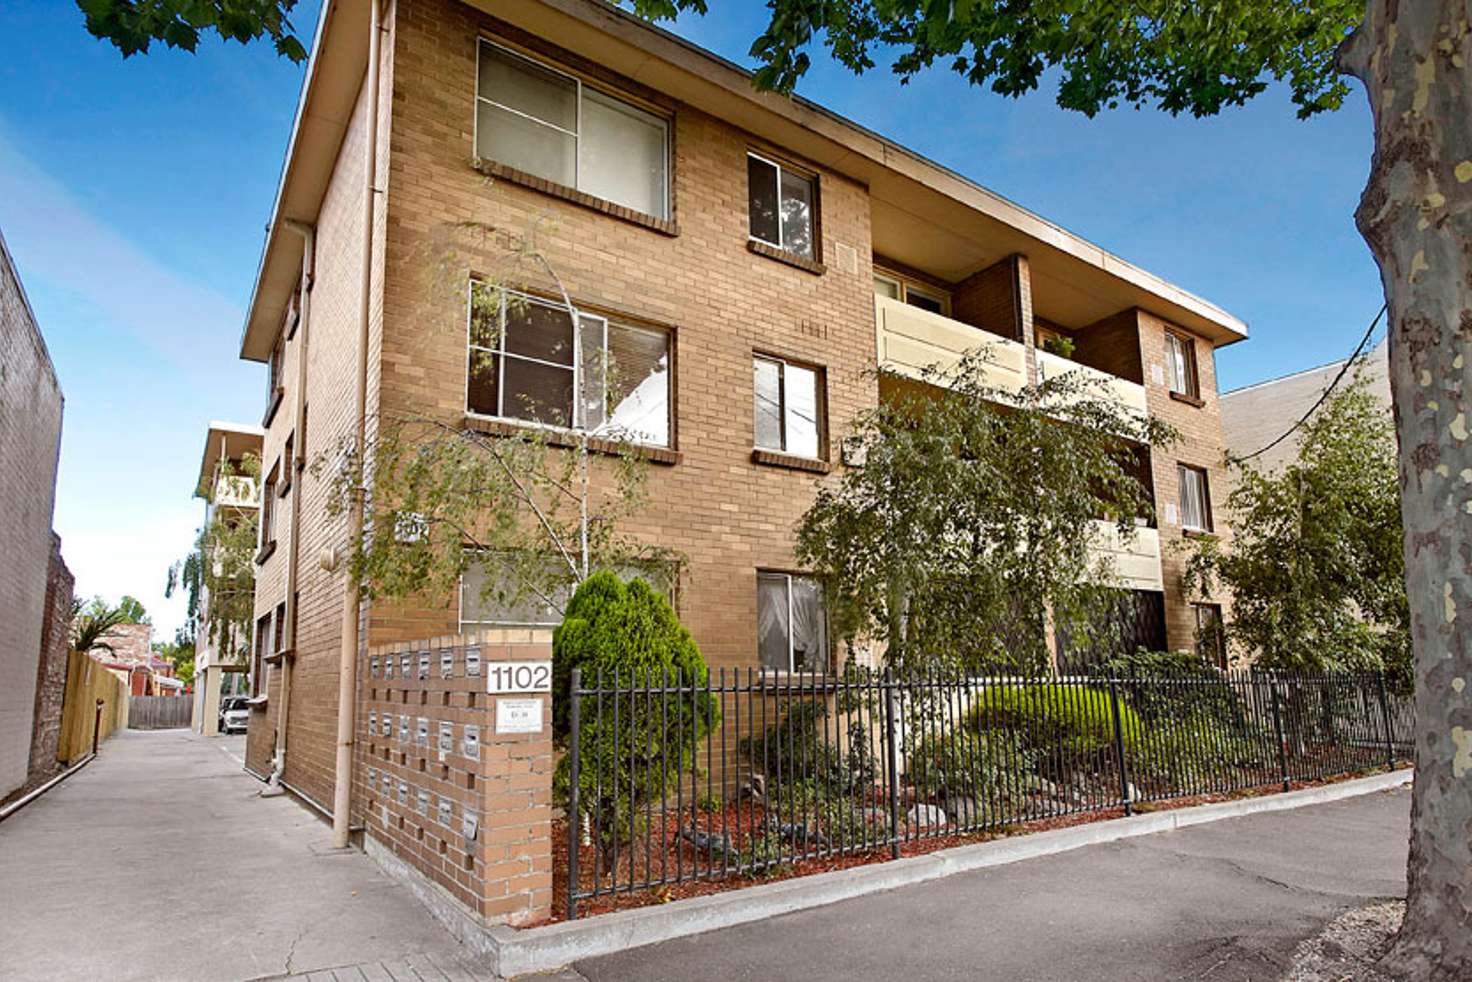 Main view of Homely apartment listing, 1/1102 Lygon Street, Carlton North VIC 3054